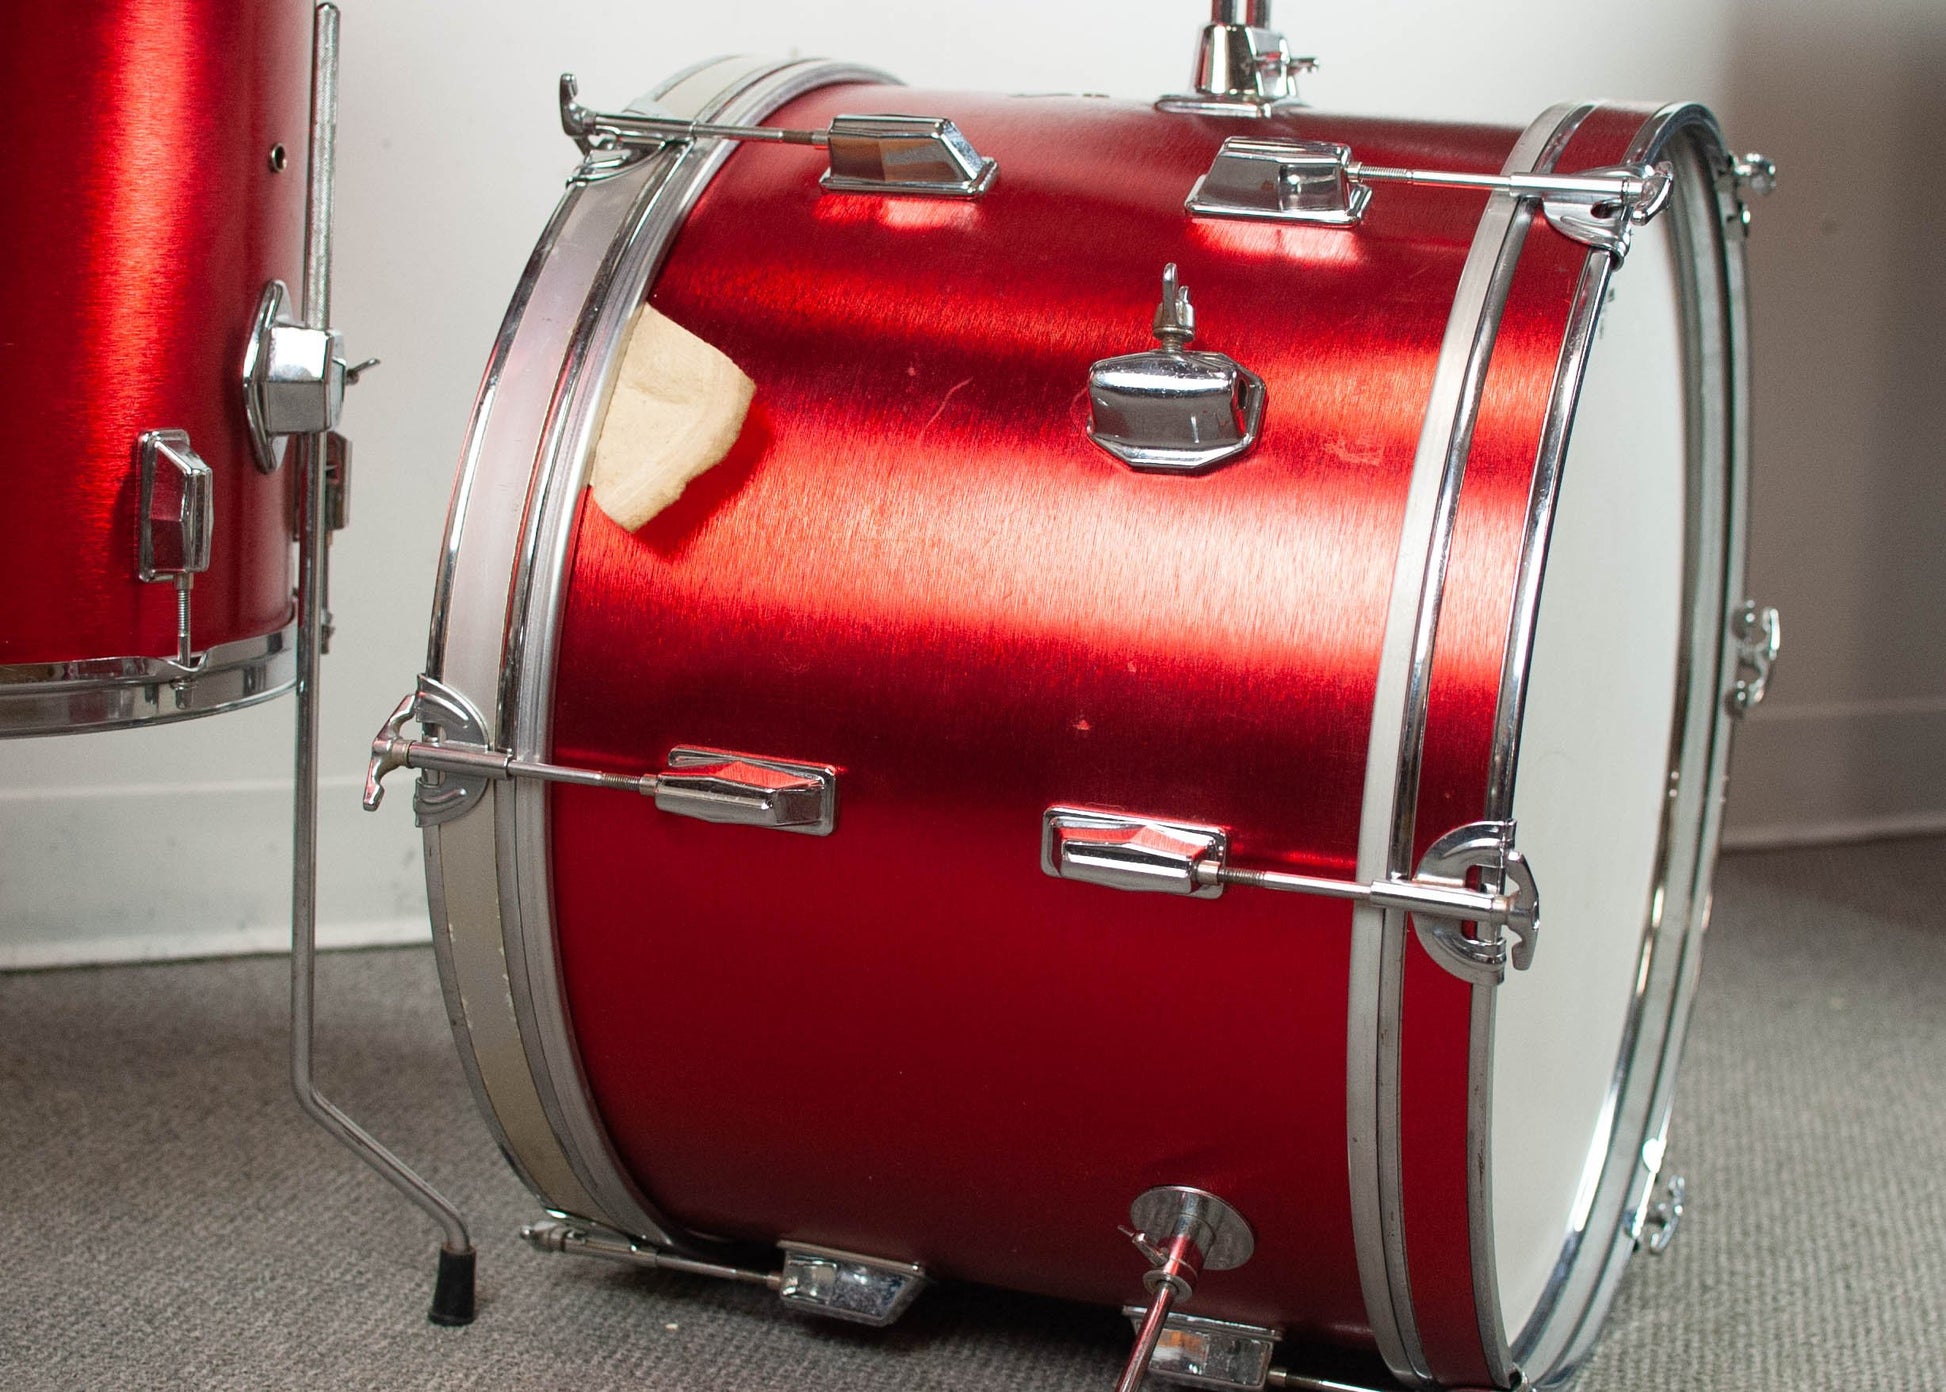 1970s Reuther "Hairline Red" Drum Kit